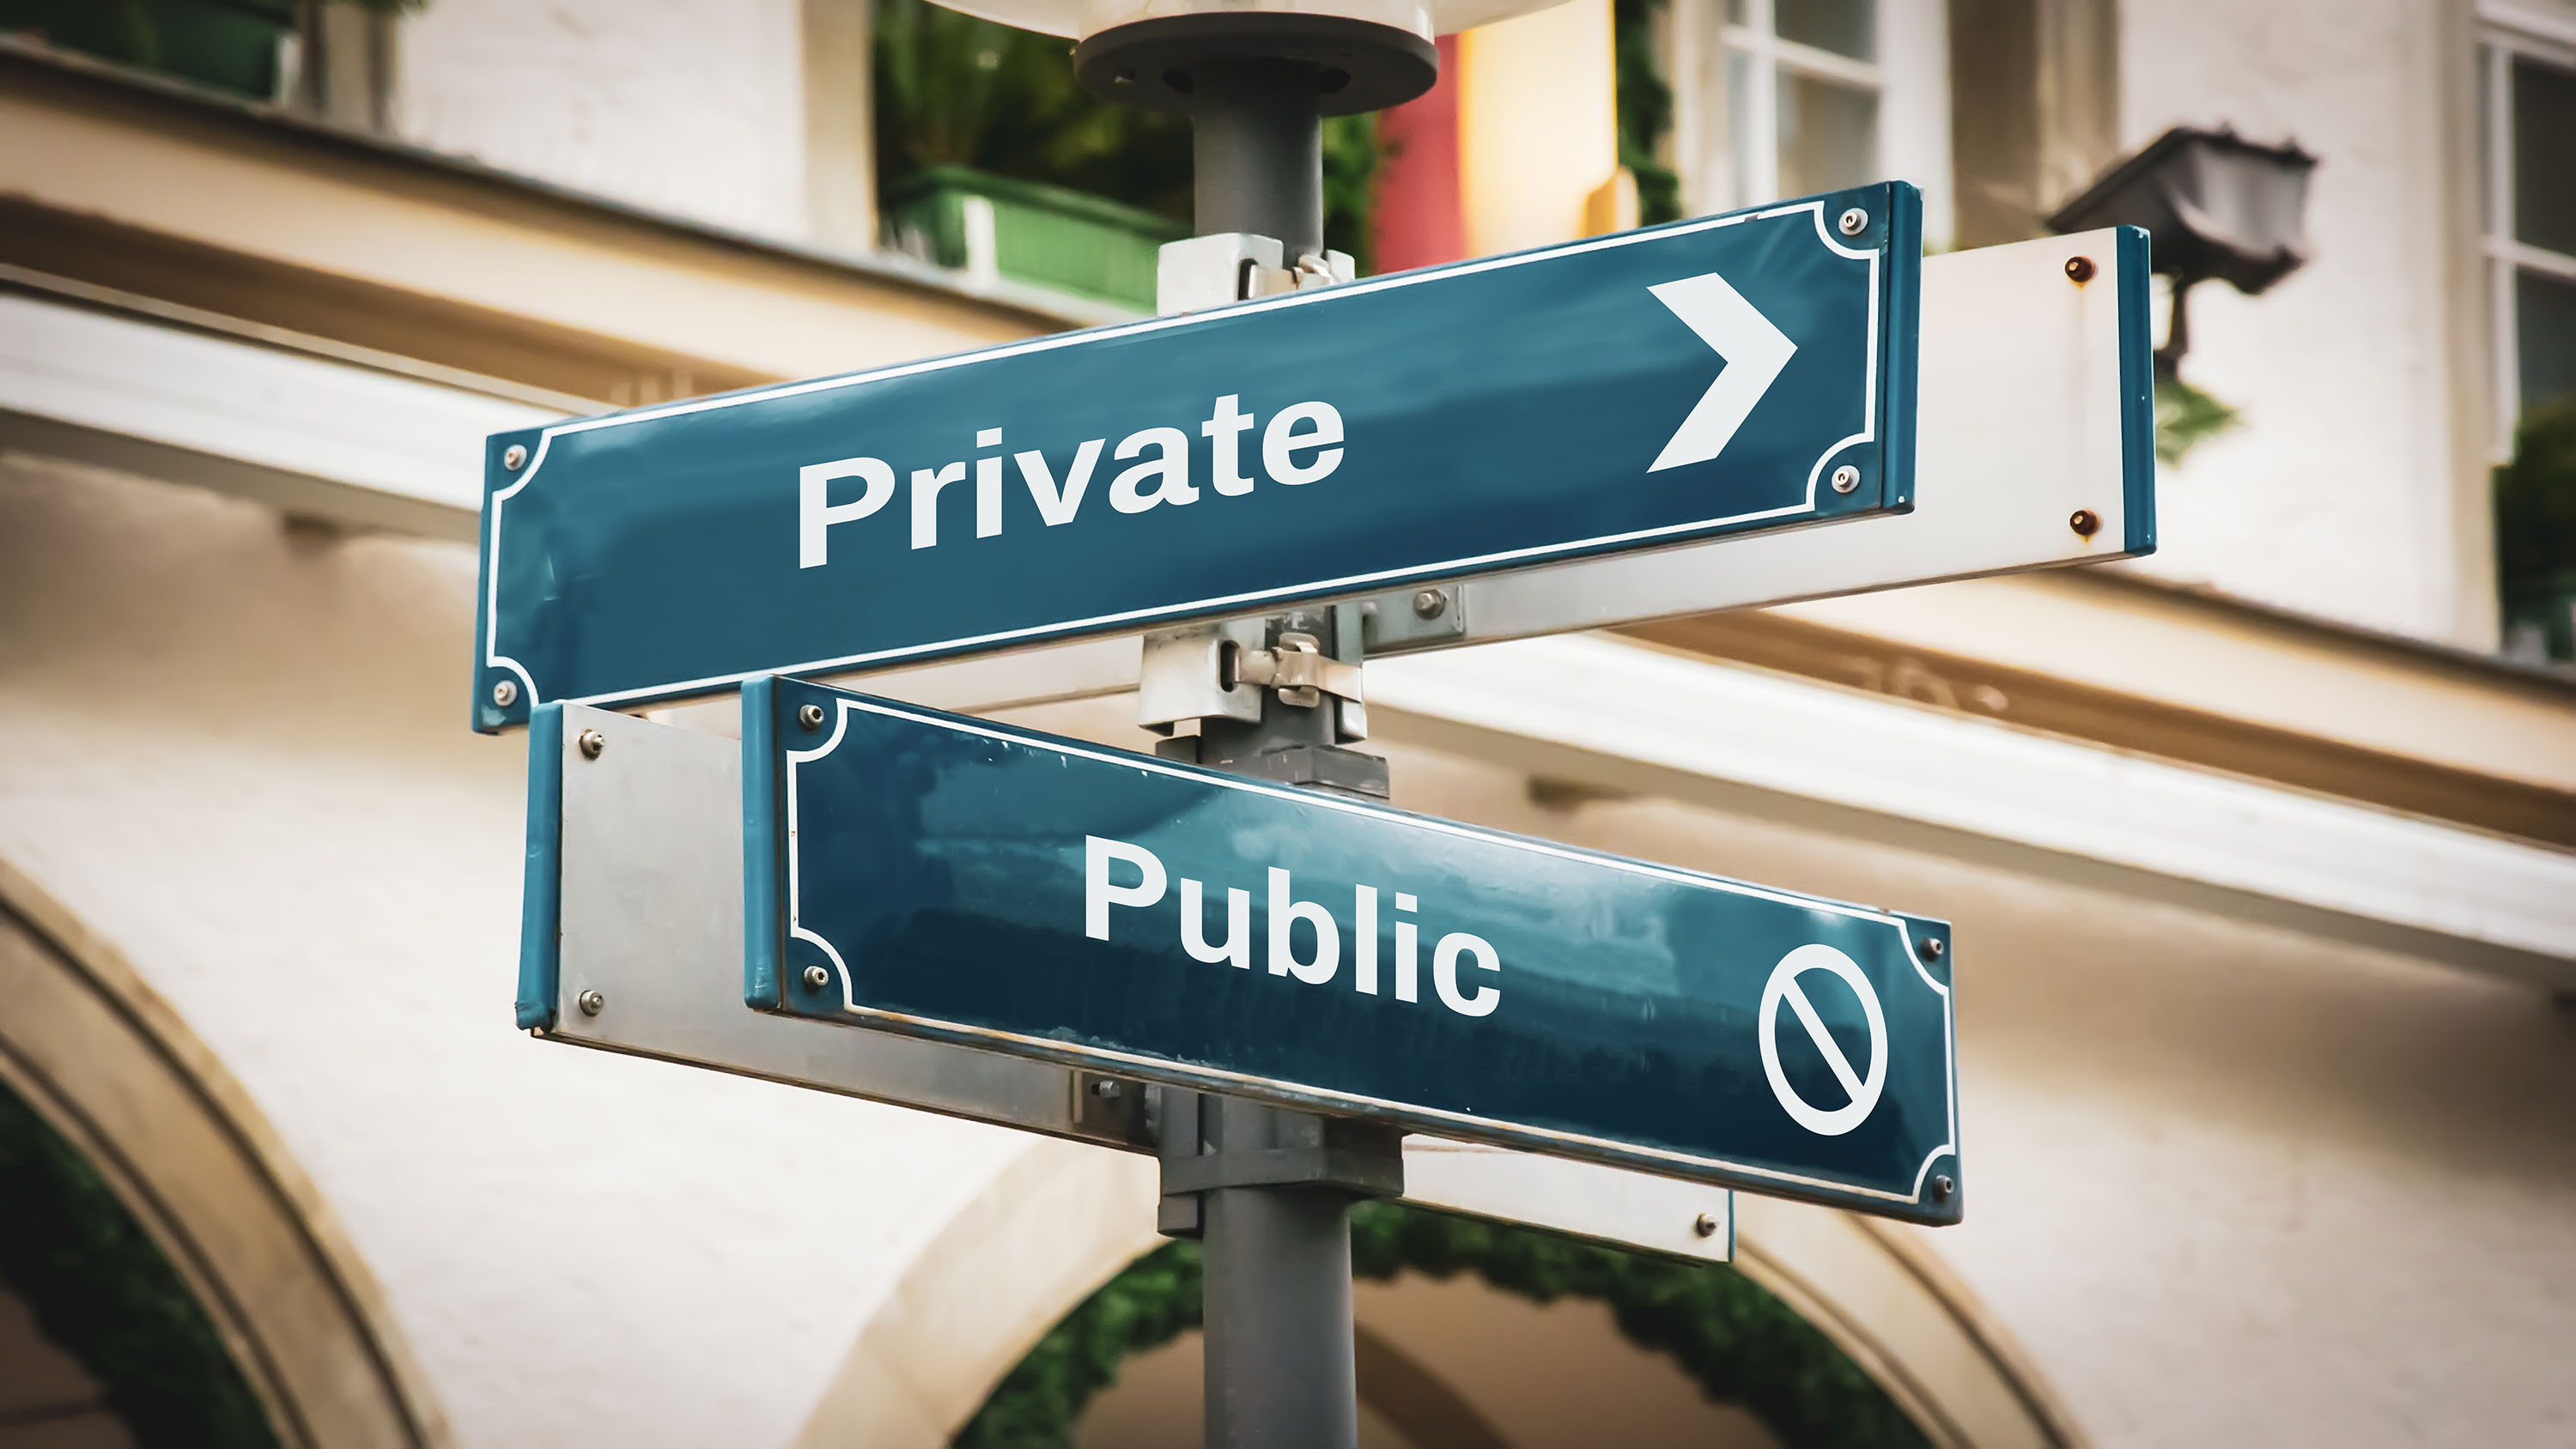 Financial reporting issues to consider in “going private” transactions